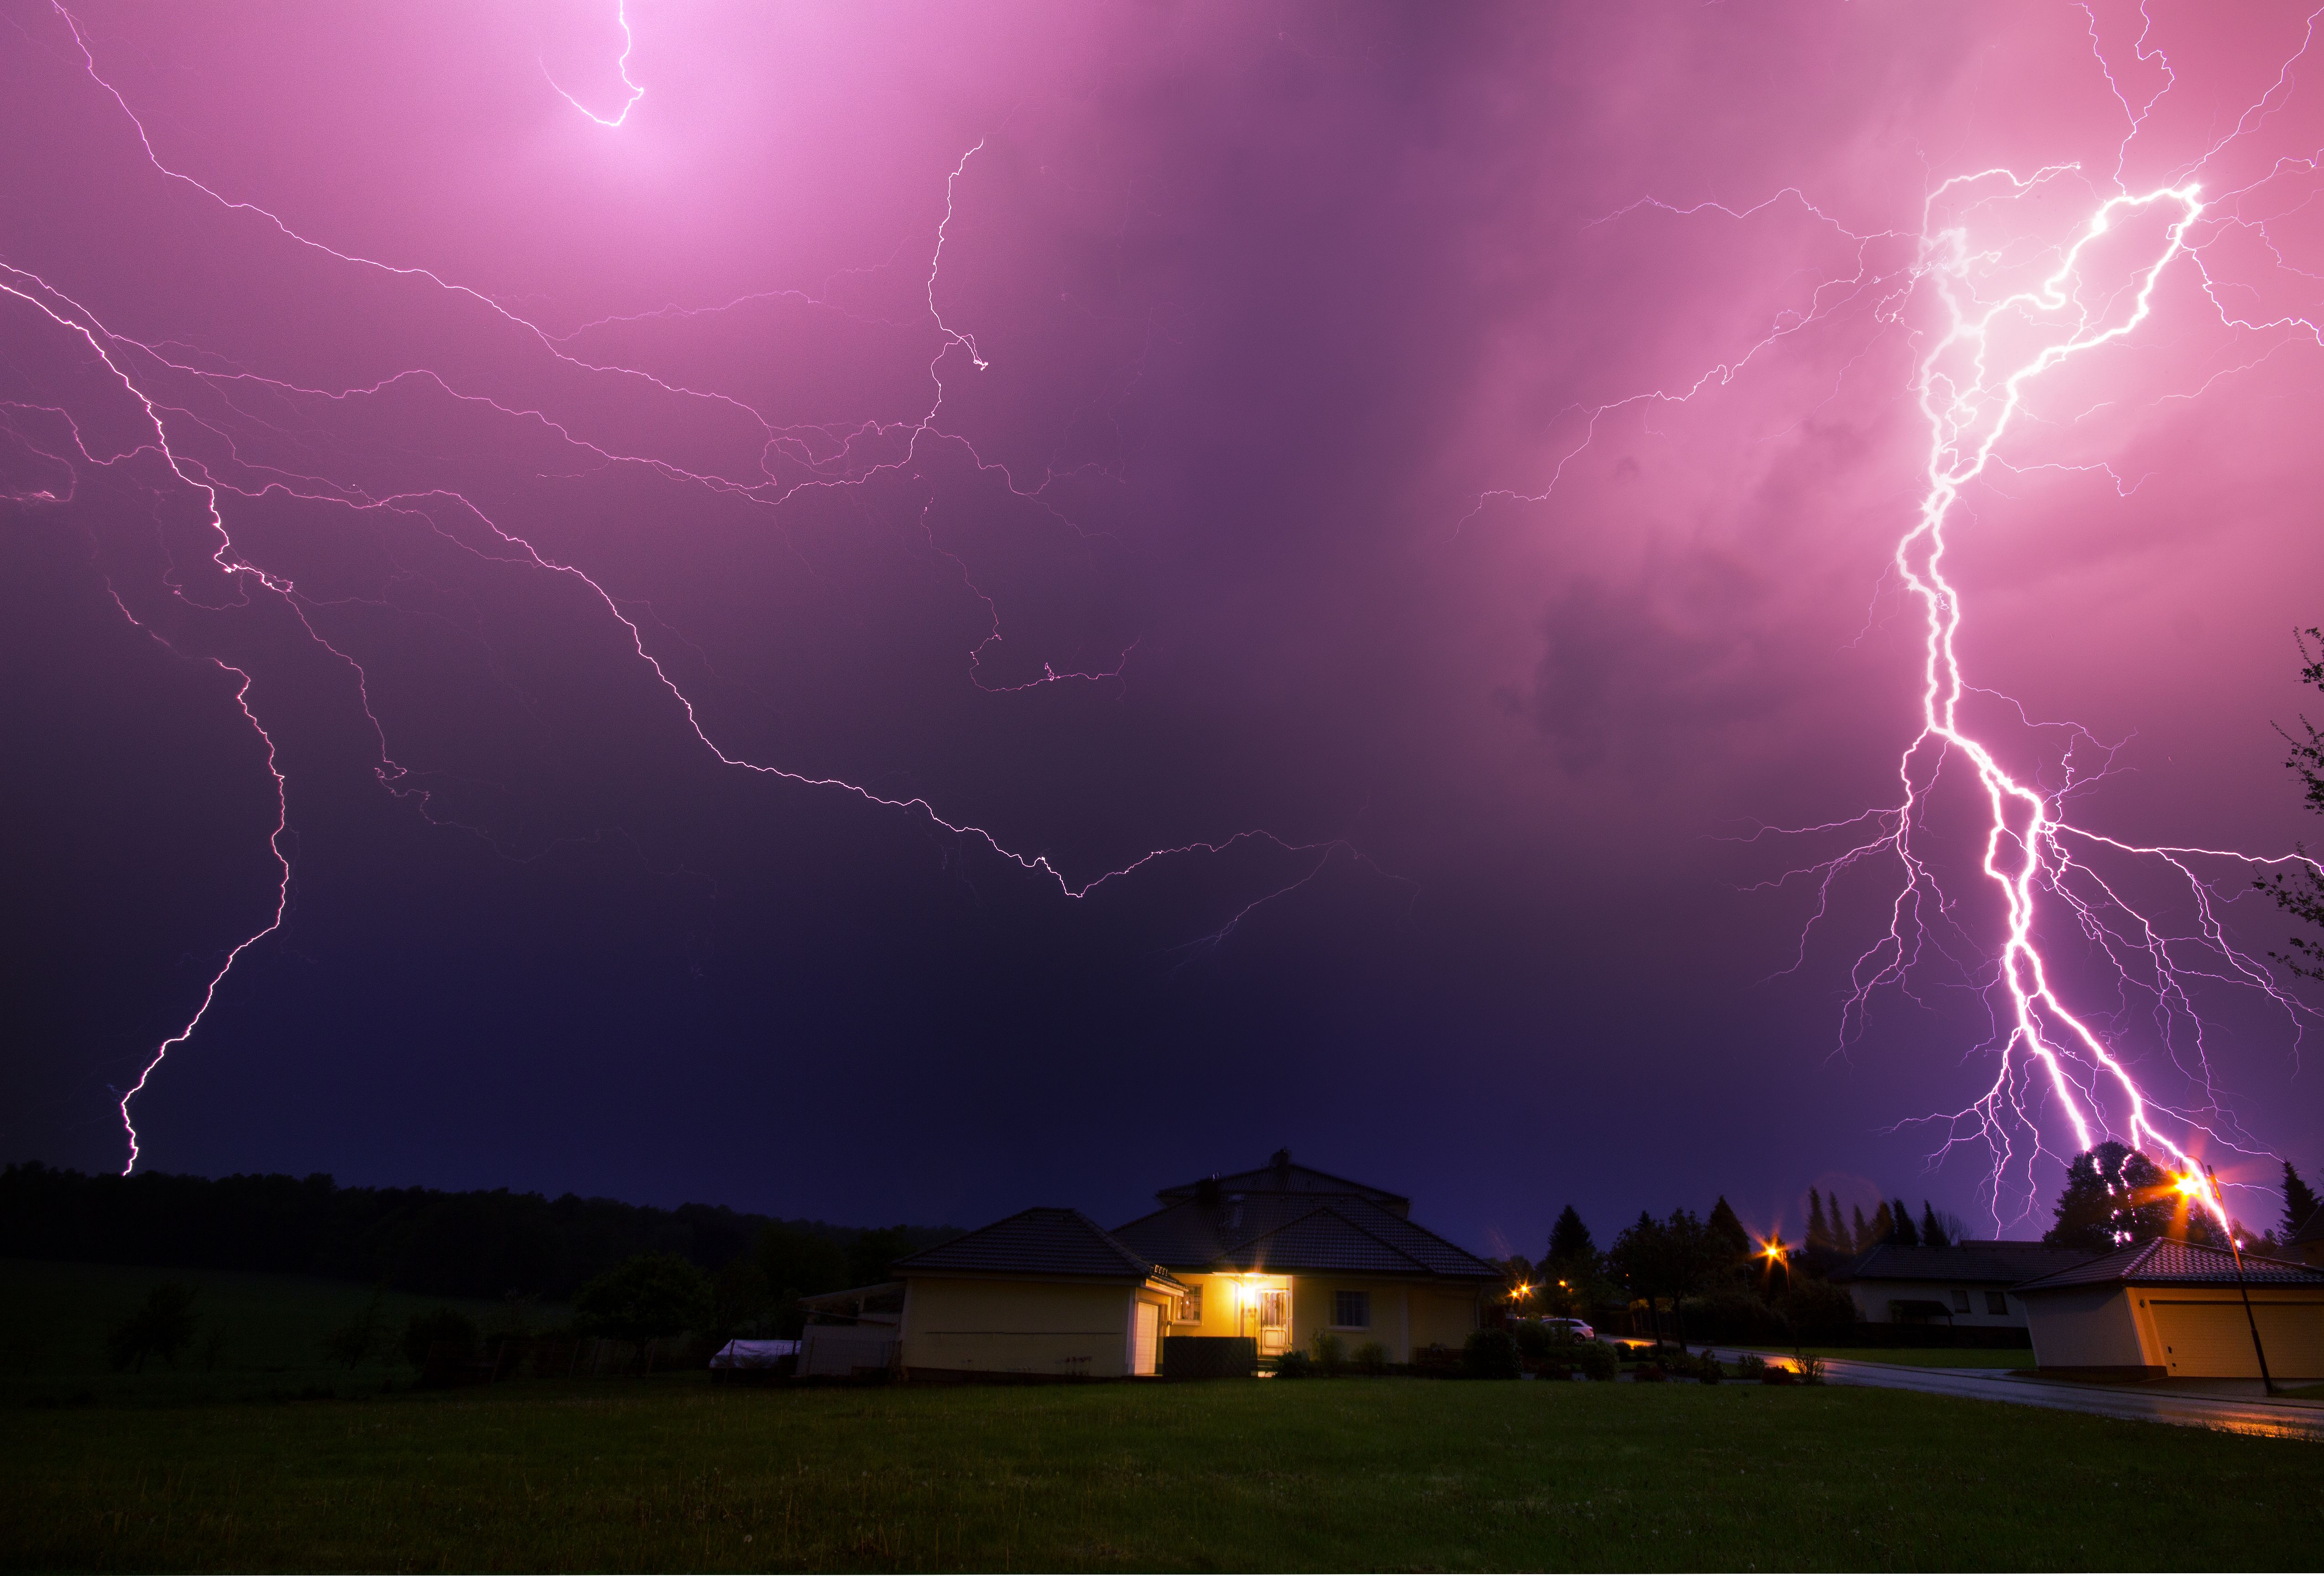 Wallpaper, night, rain, artwork, lightning, storm, cold, gods, Flash, thunder, spring, electricity, light, stormy, beautiful, weather, removedfromstrobistpool, thunderstorm, colour, scary, colourful, amazing, nooffcameraflash, seerule1 5093x3453